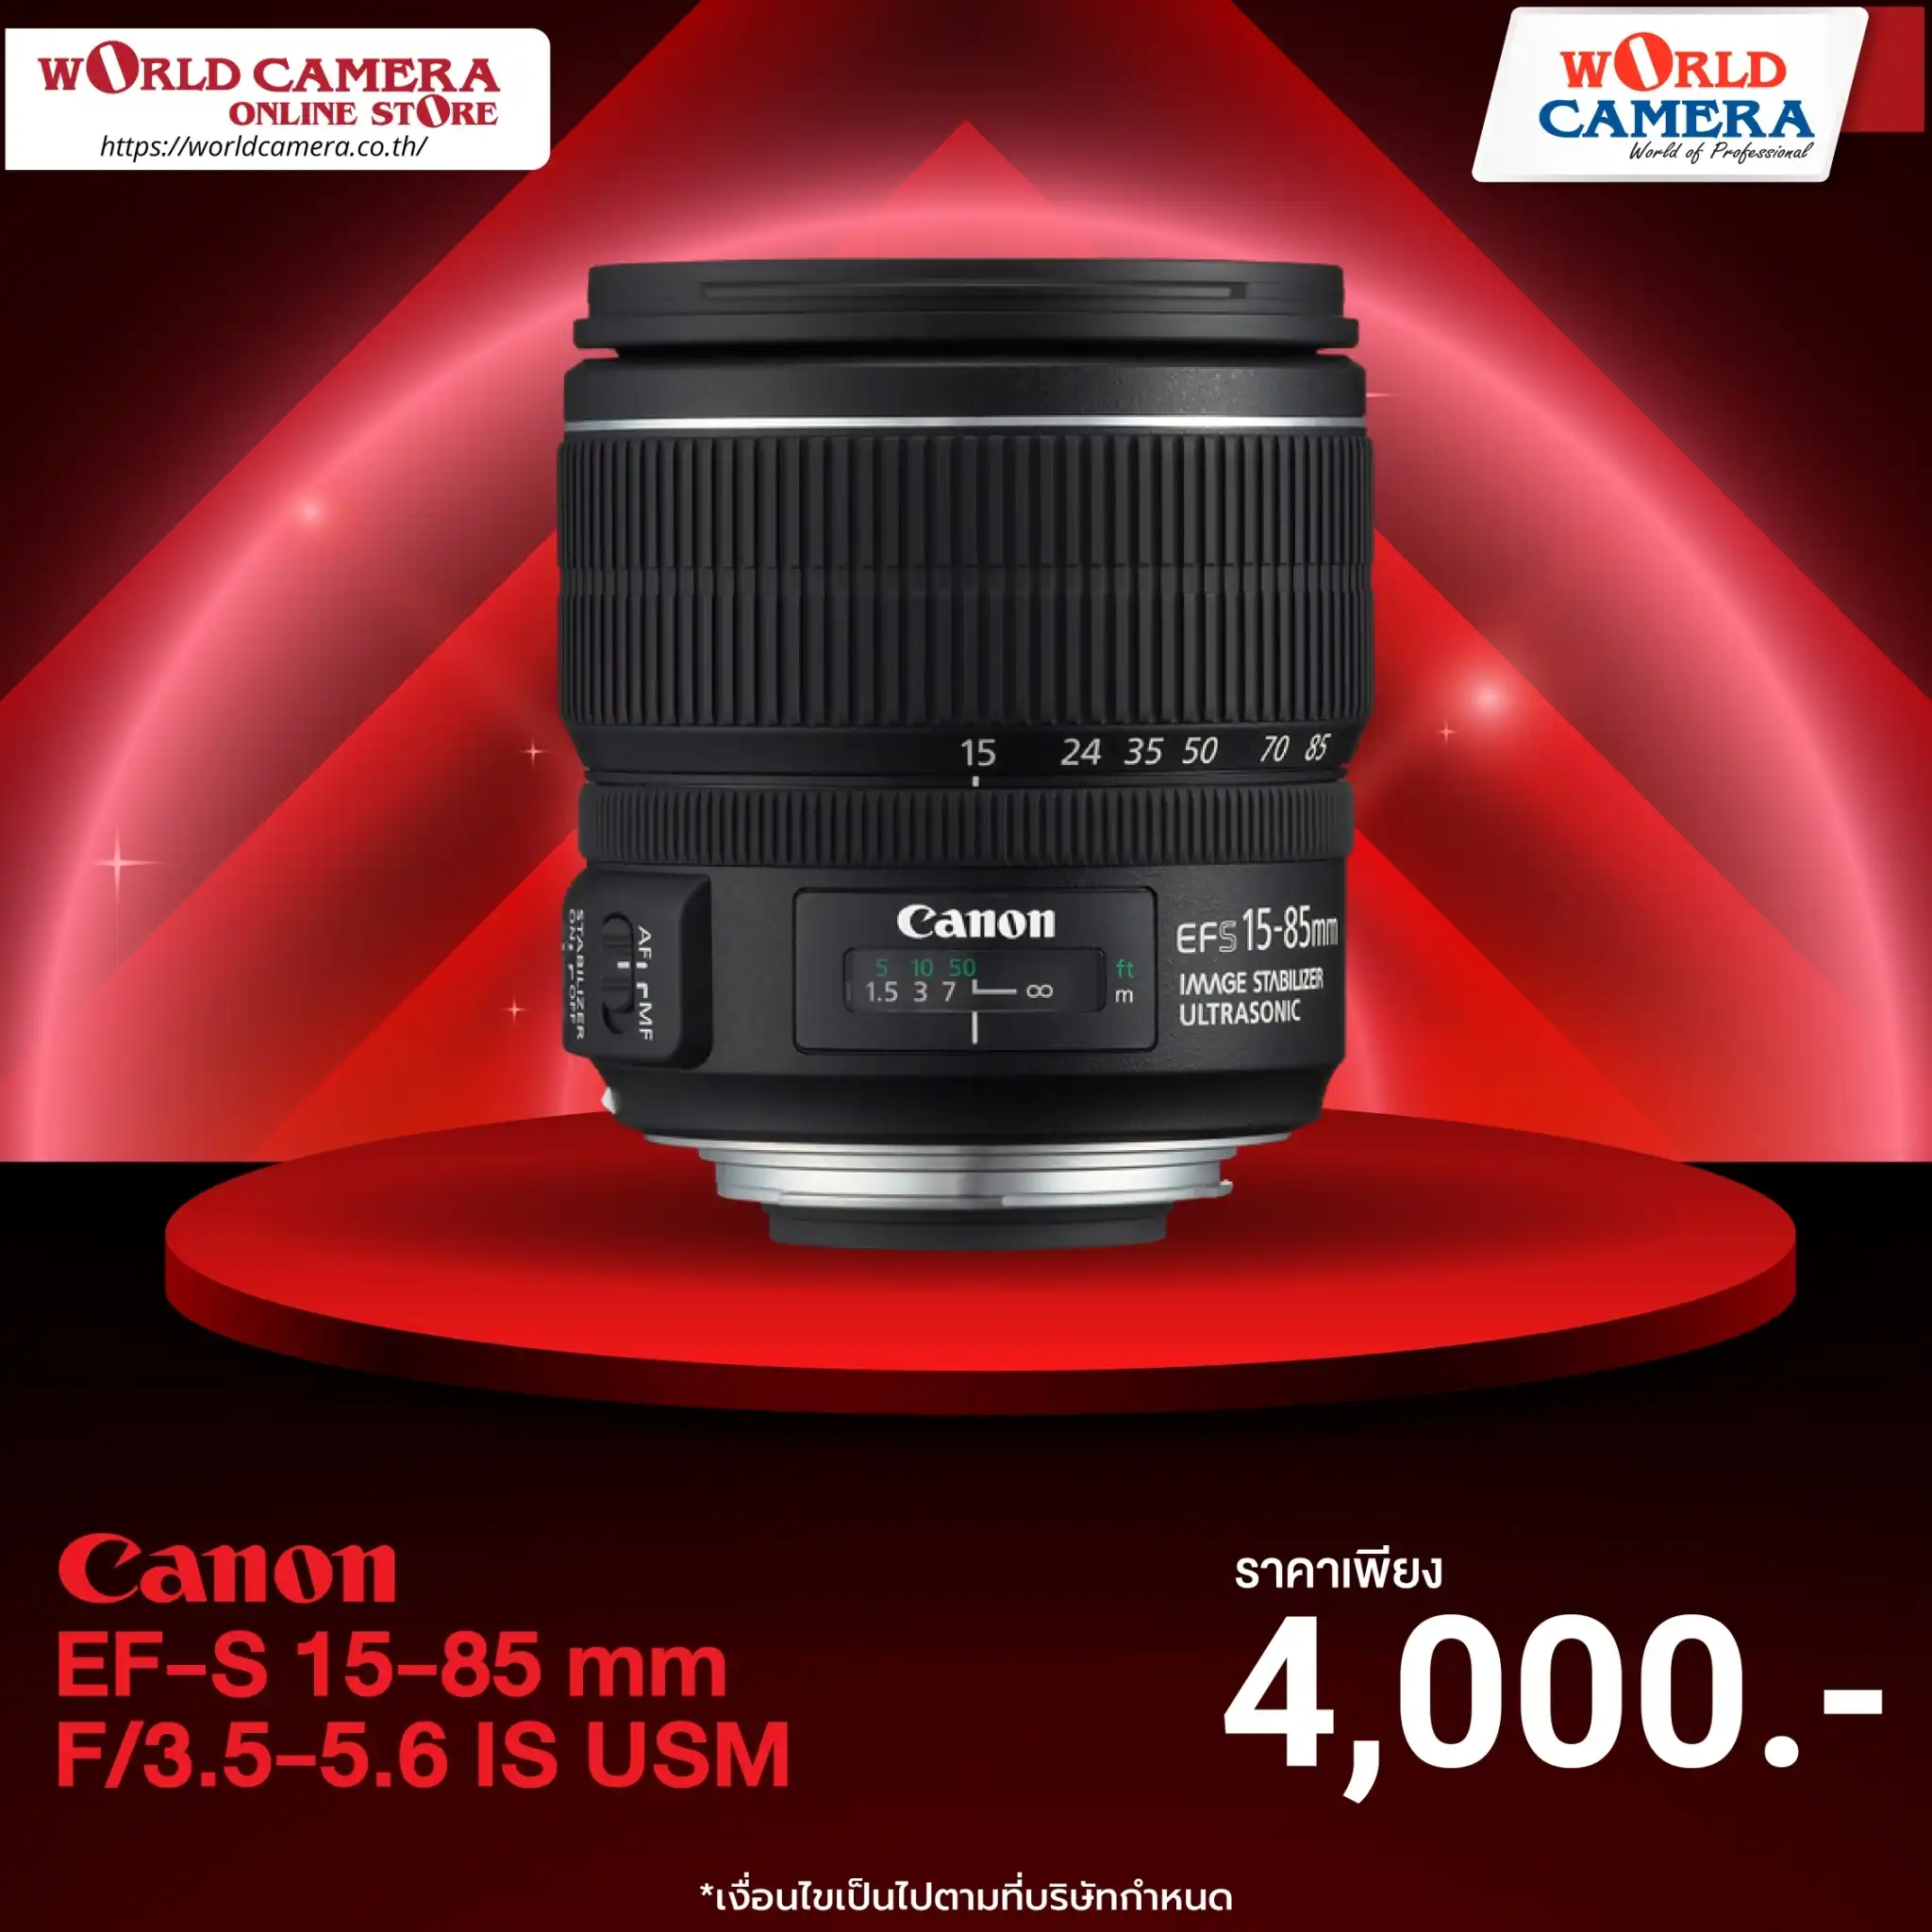 CANON EF-S 15-85 mm F3.5-5.6 IS (KIT EOS 7D BODY) ( DEMO ) - WORLD CAMERA